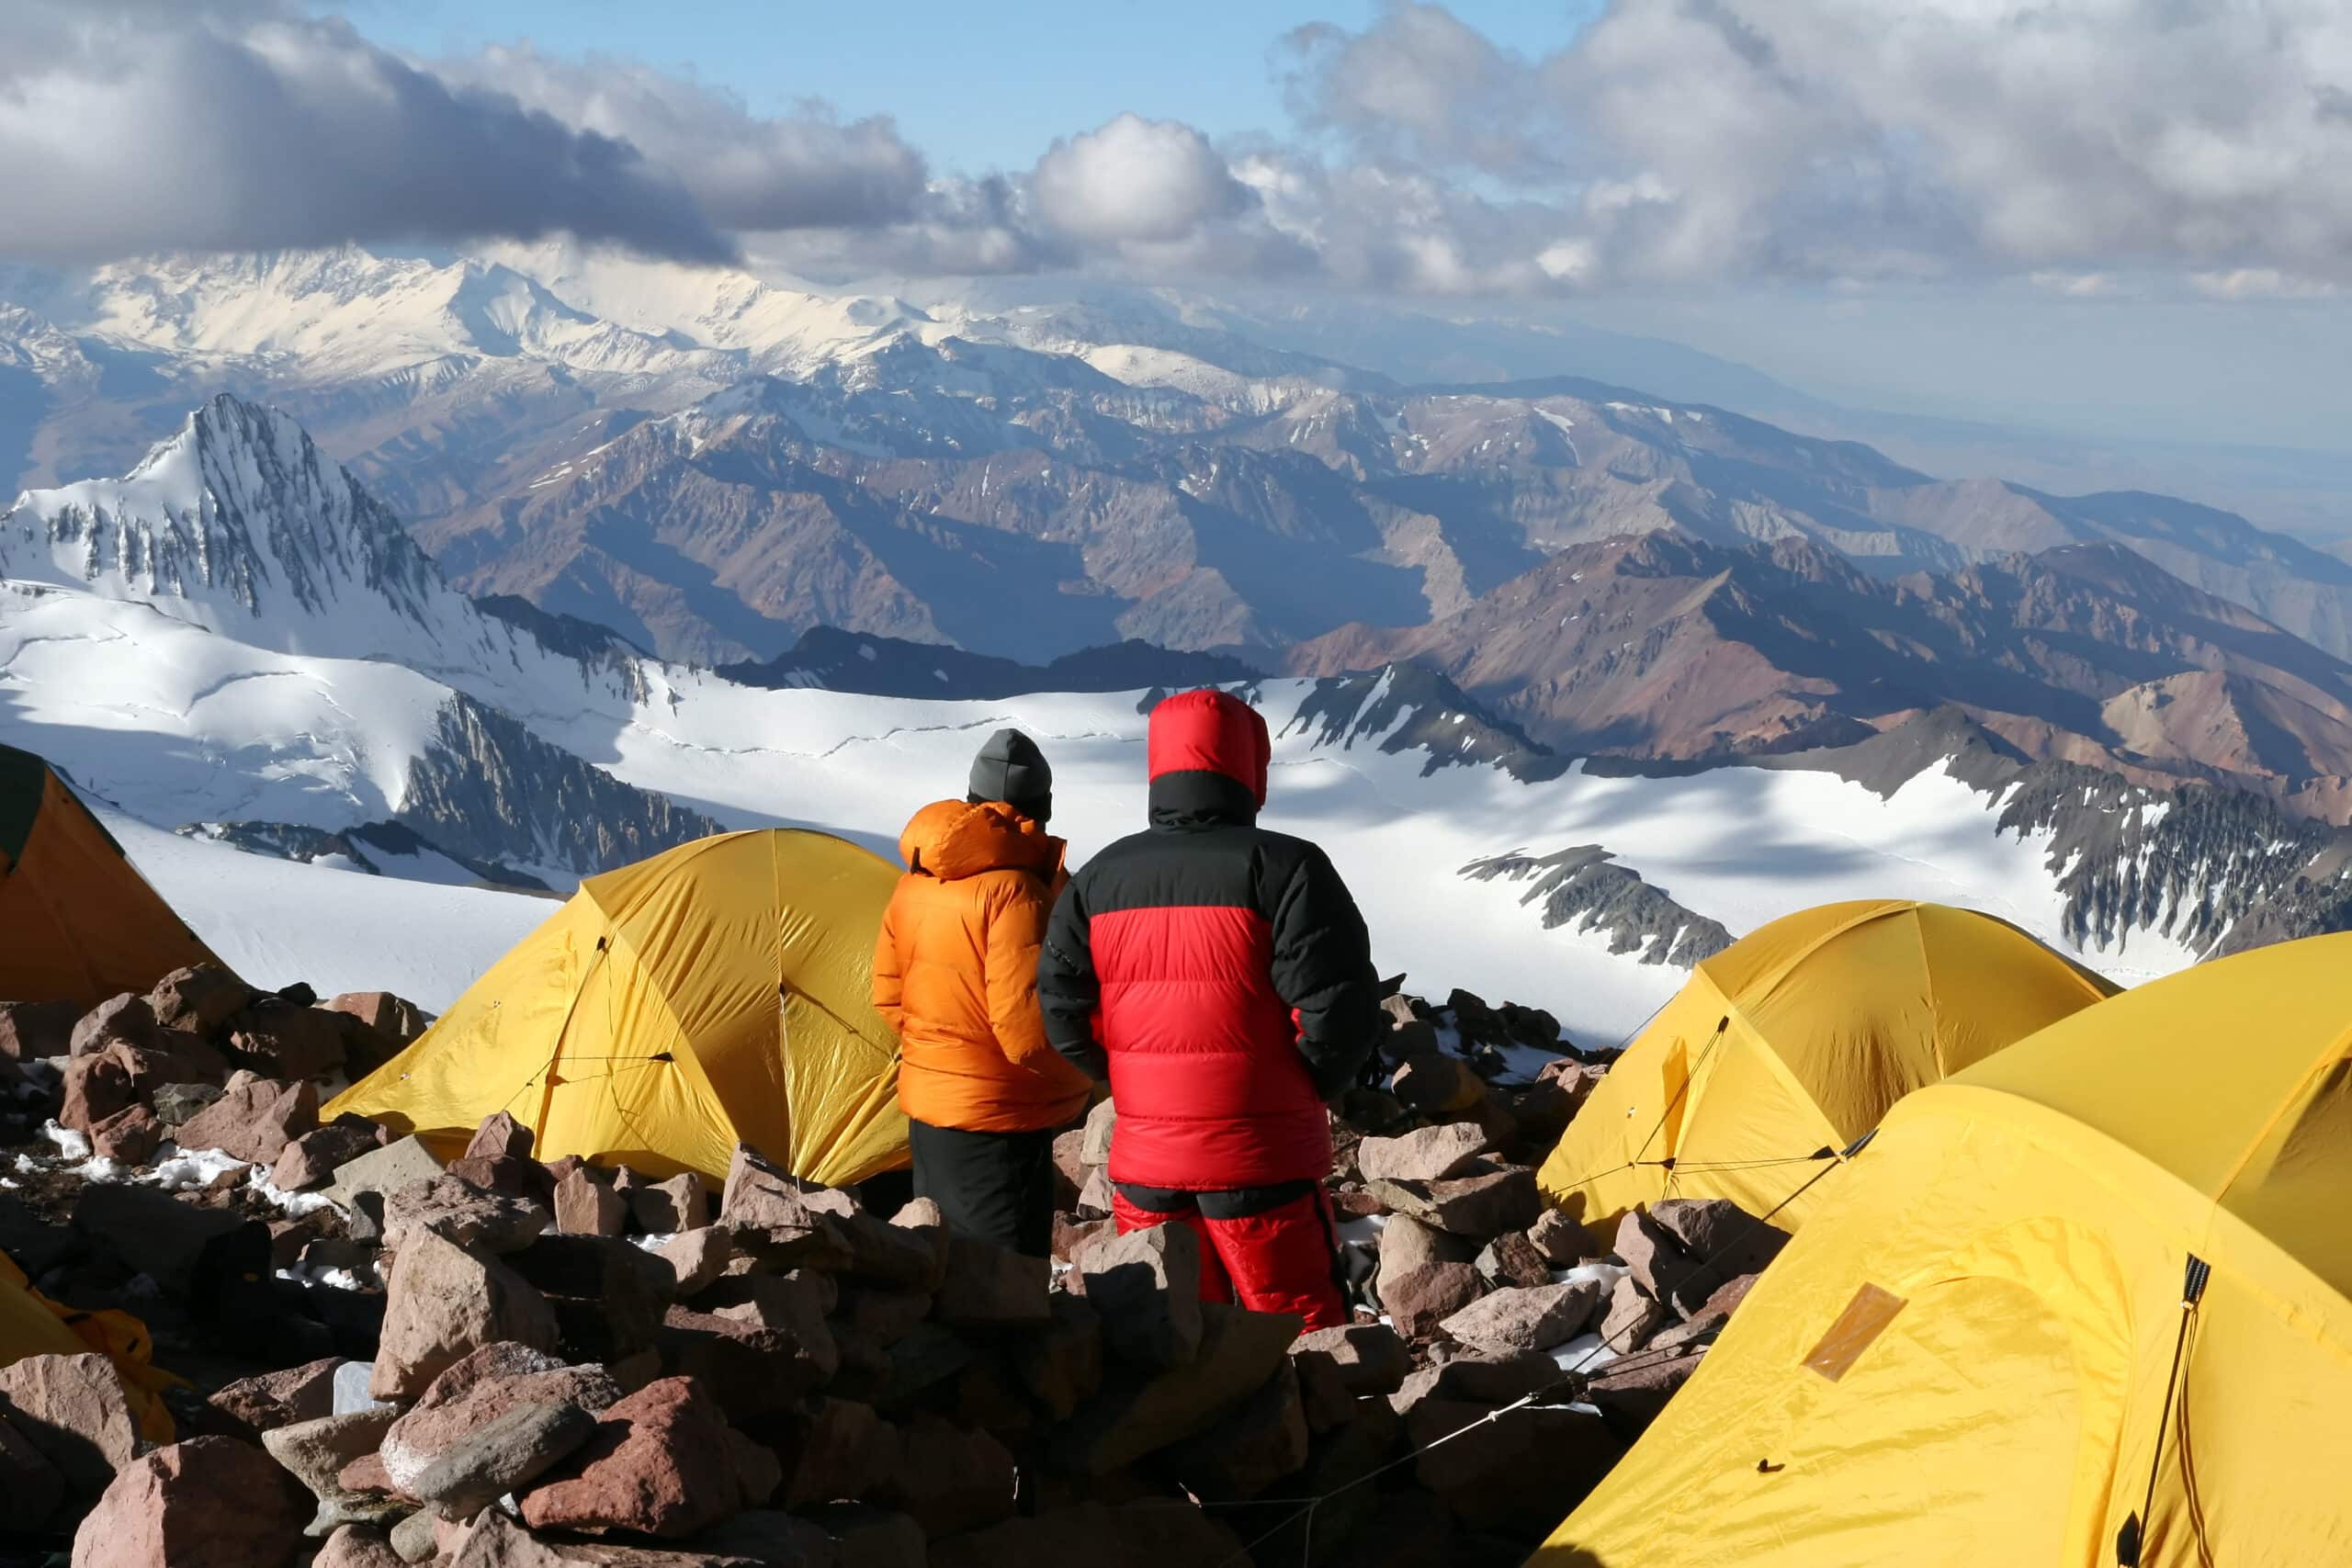 Two people standing on top of a mountain with tents in the background.